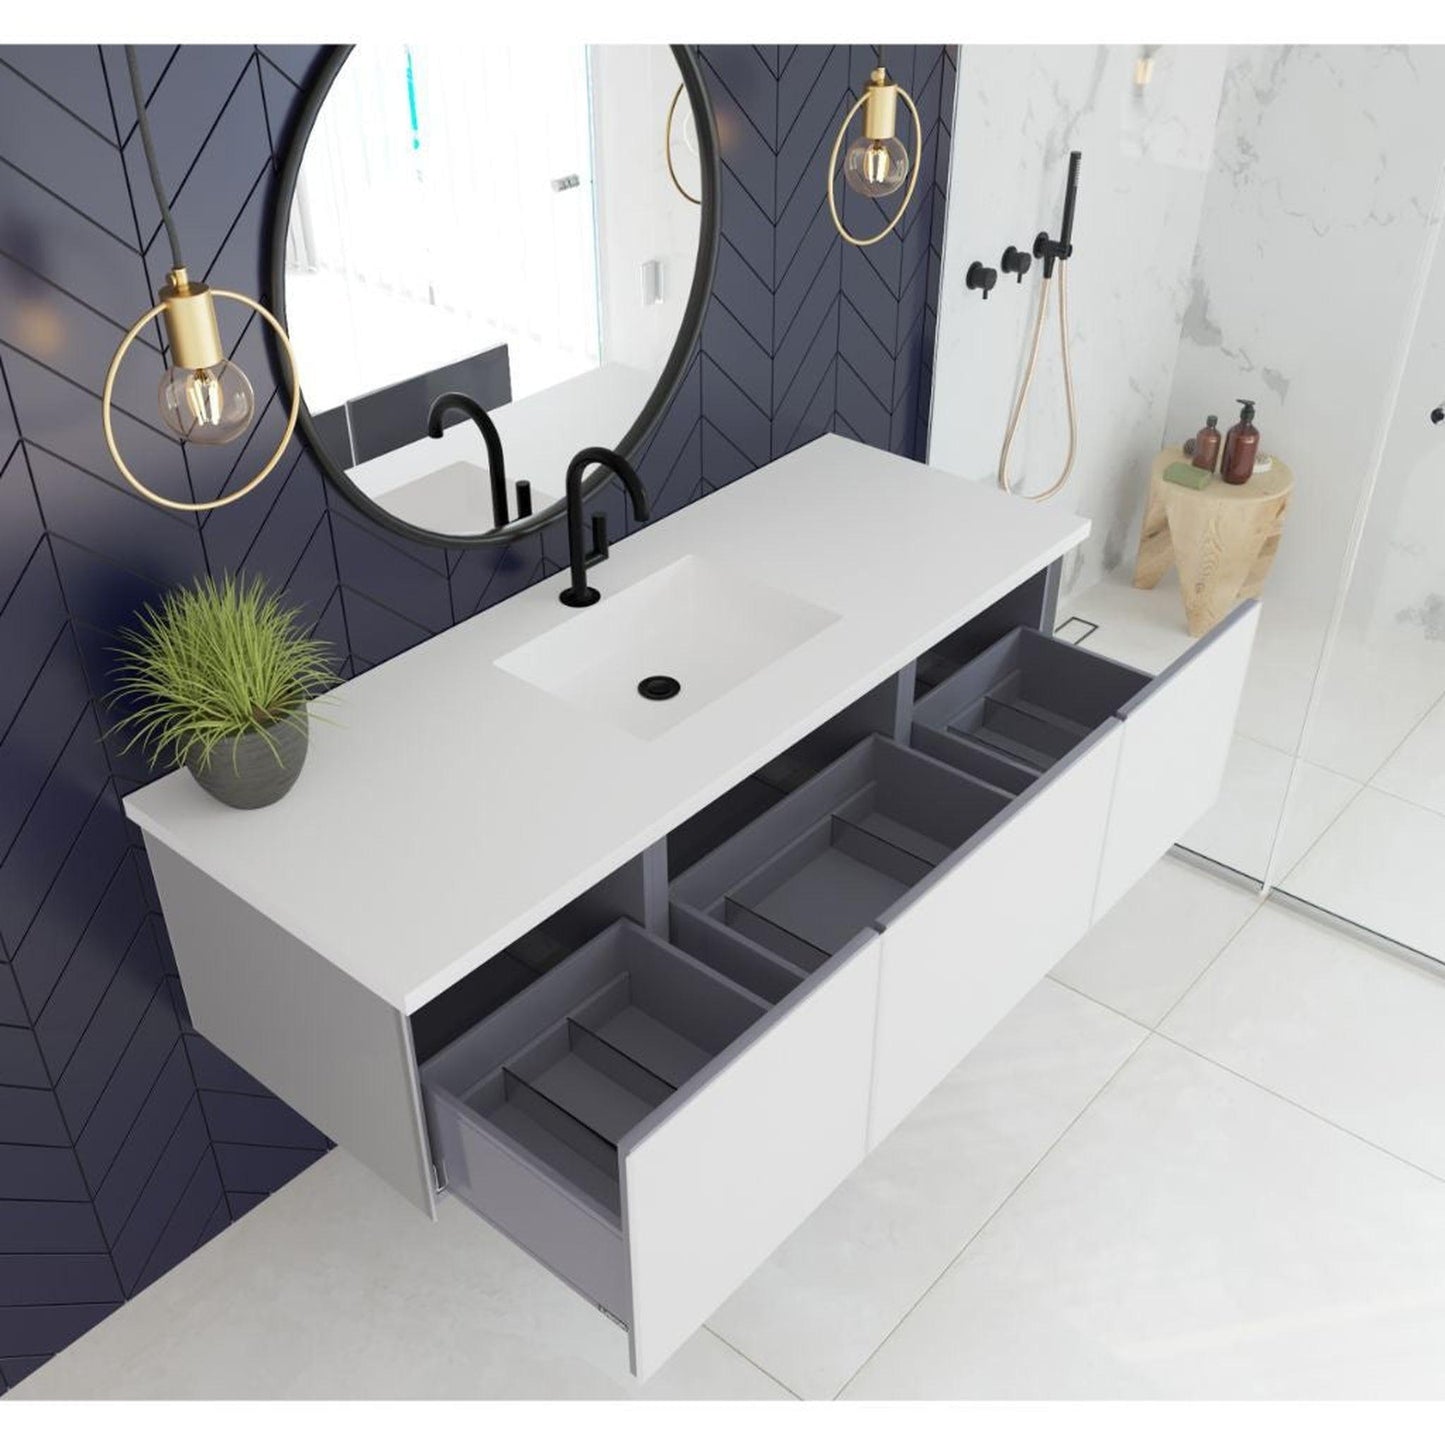 Laviva Vitri 60" Cloud White Vanity Base and Matte White Solid Surface Countertop With Single Integrated Sink